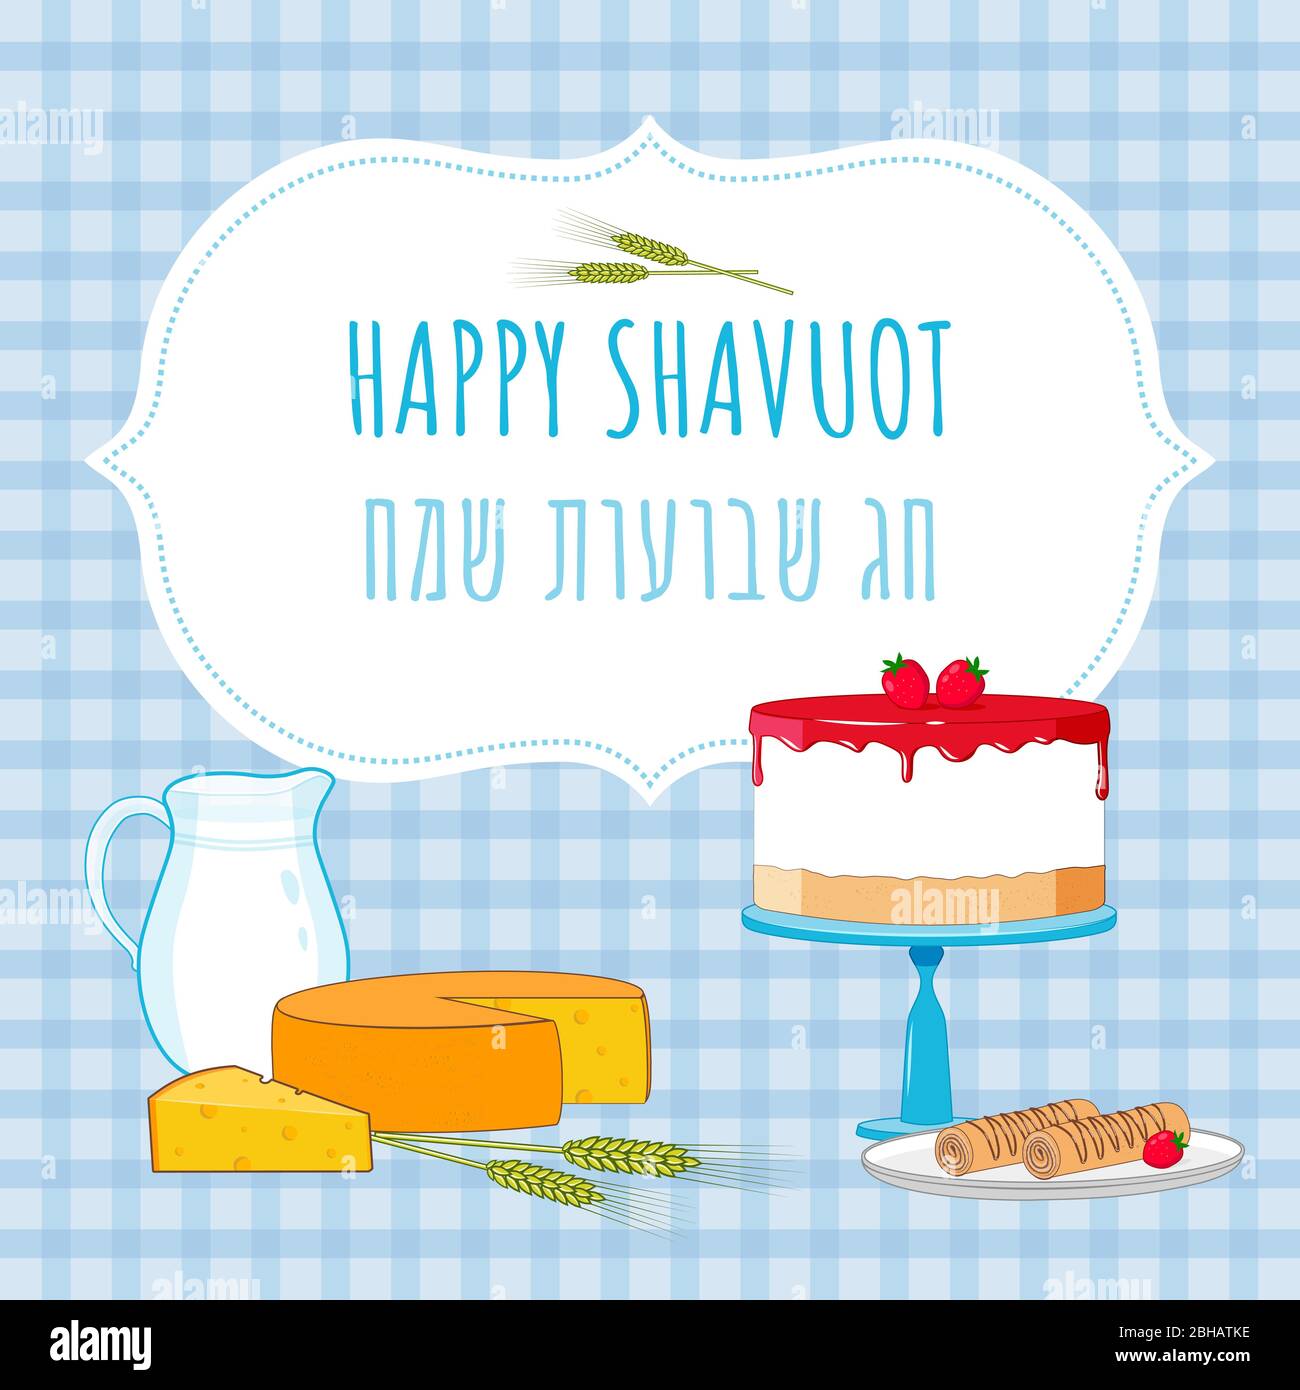 Shavuot Jewish holiday frame banner with milk jug, cheese, cheese cake, wheat Stock Vector